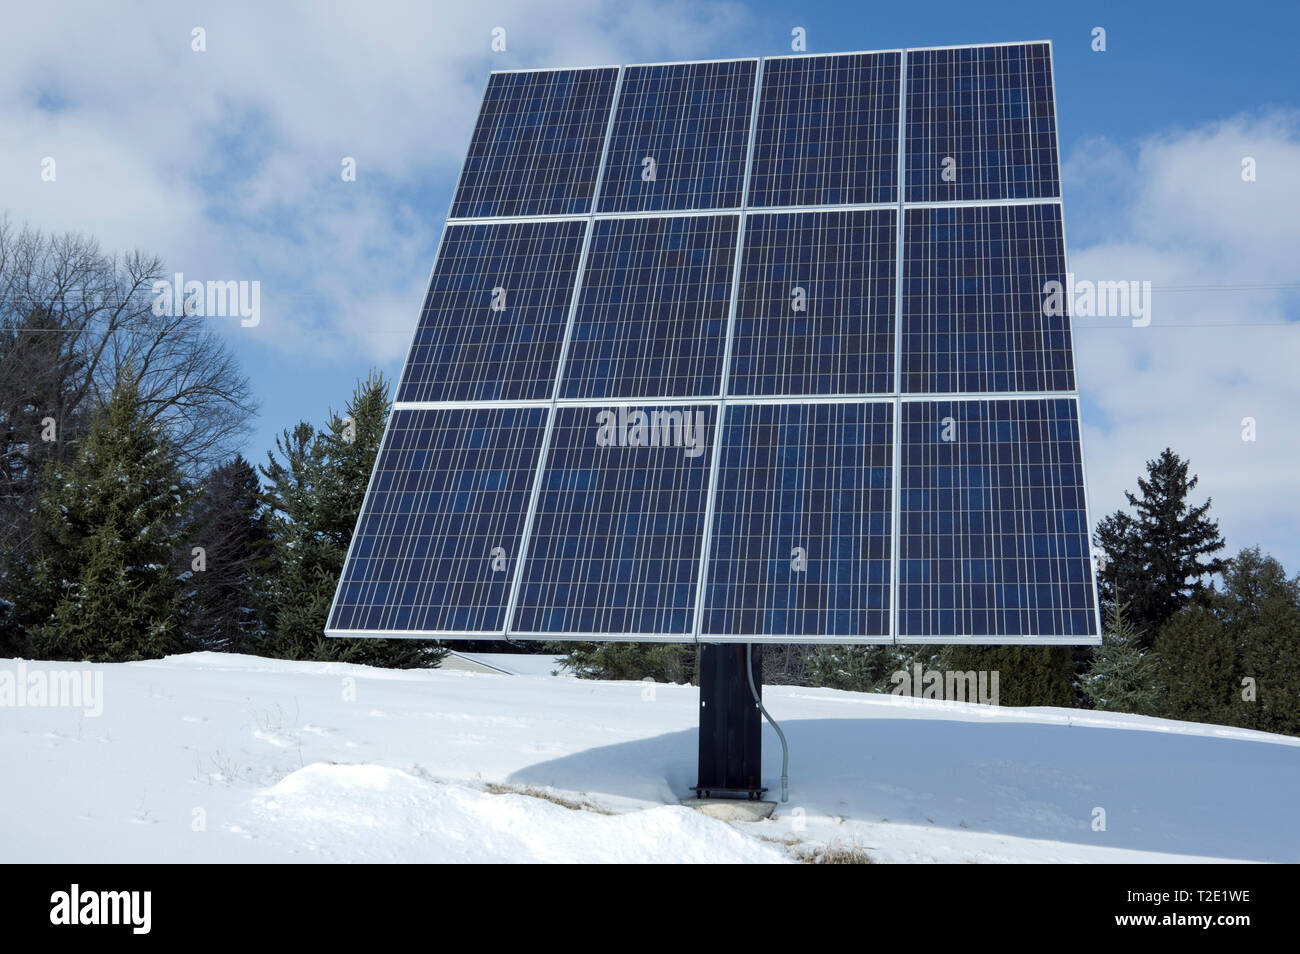 Pole mounted residential solar panel array, rated at 2.6 KW with 12 photovoltaic solar panels. Stock Photo